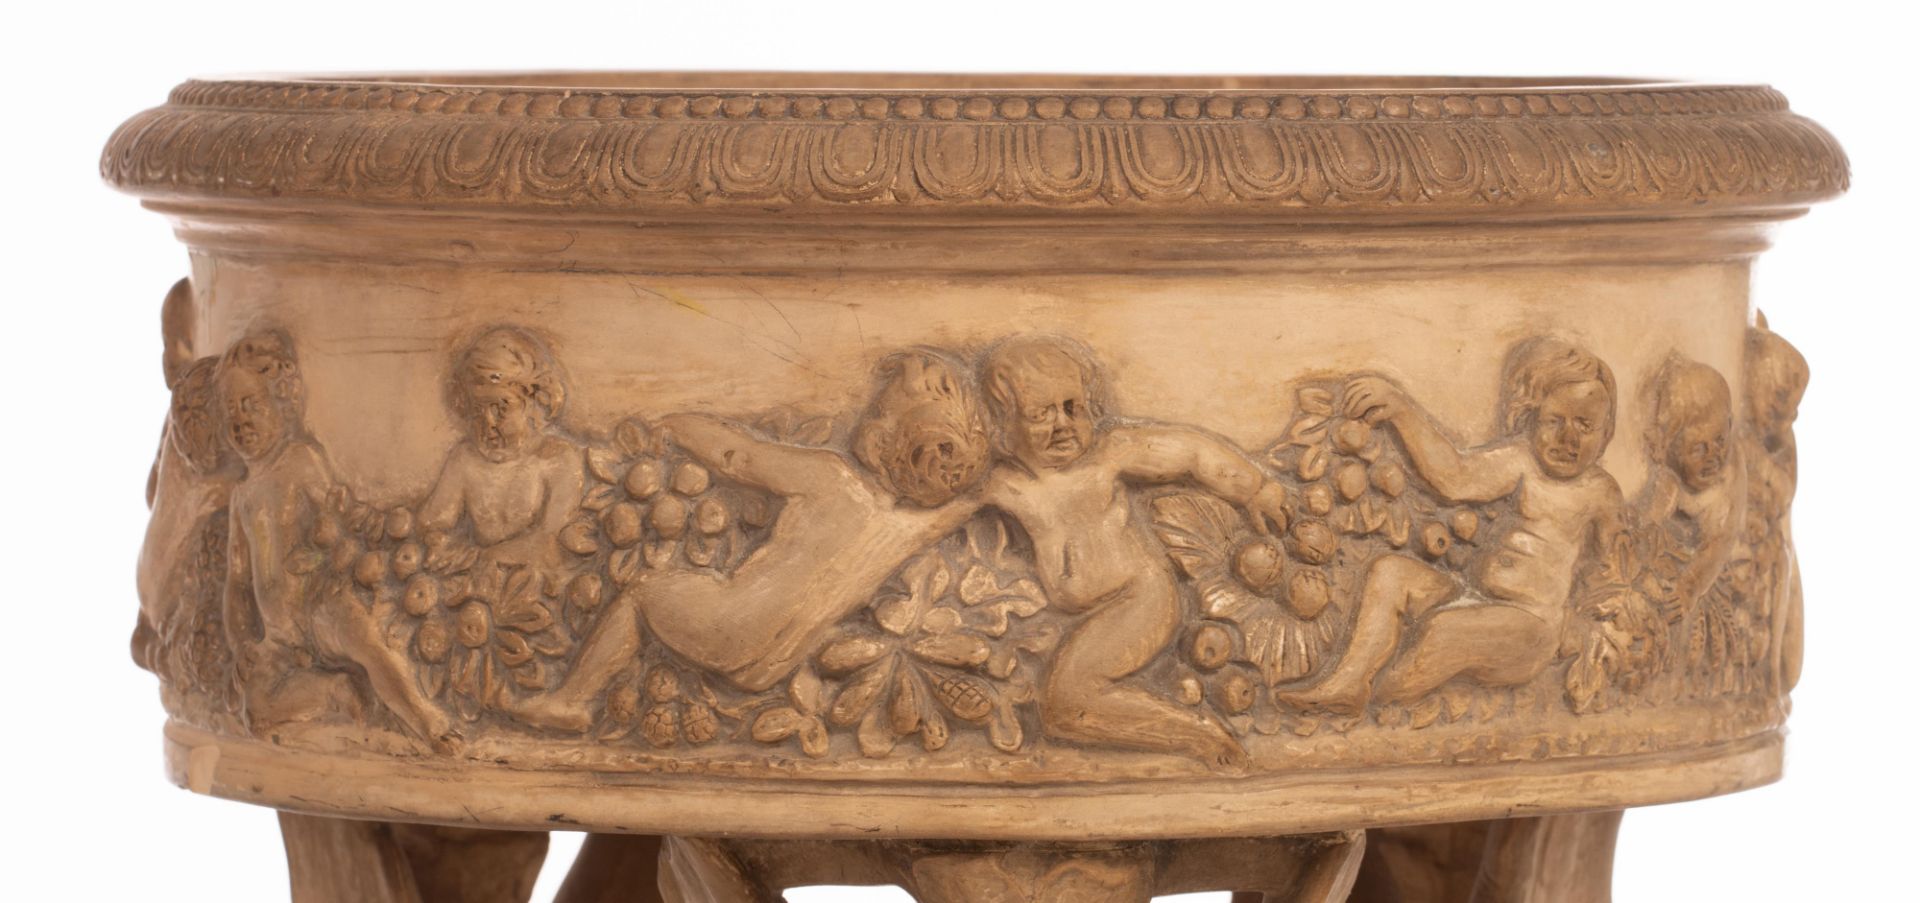 An Empire style patinated terracotta jardinière, H 90 - ø 36,5 cm - Image 9 of 17